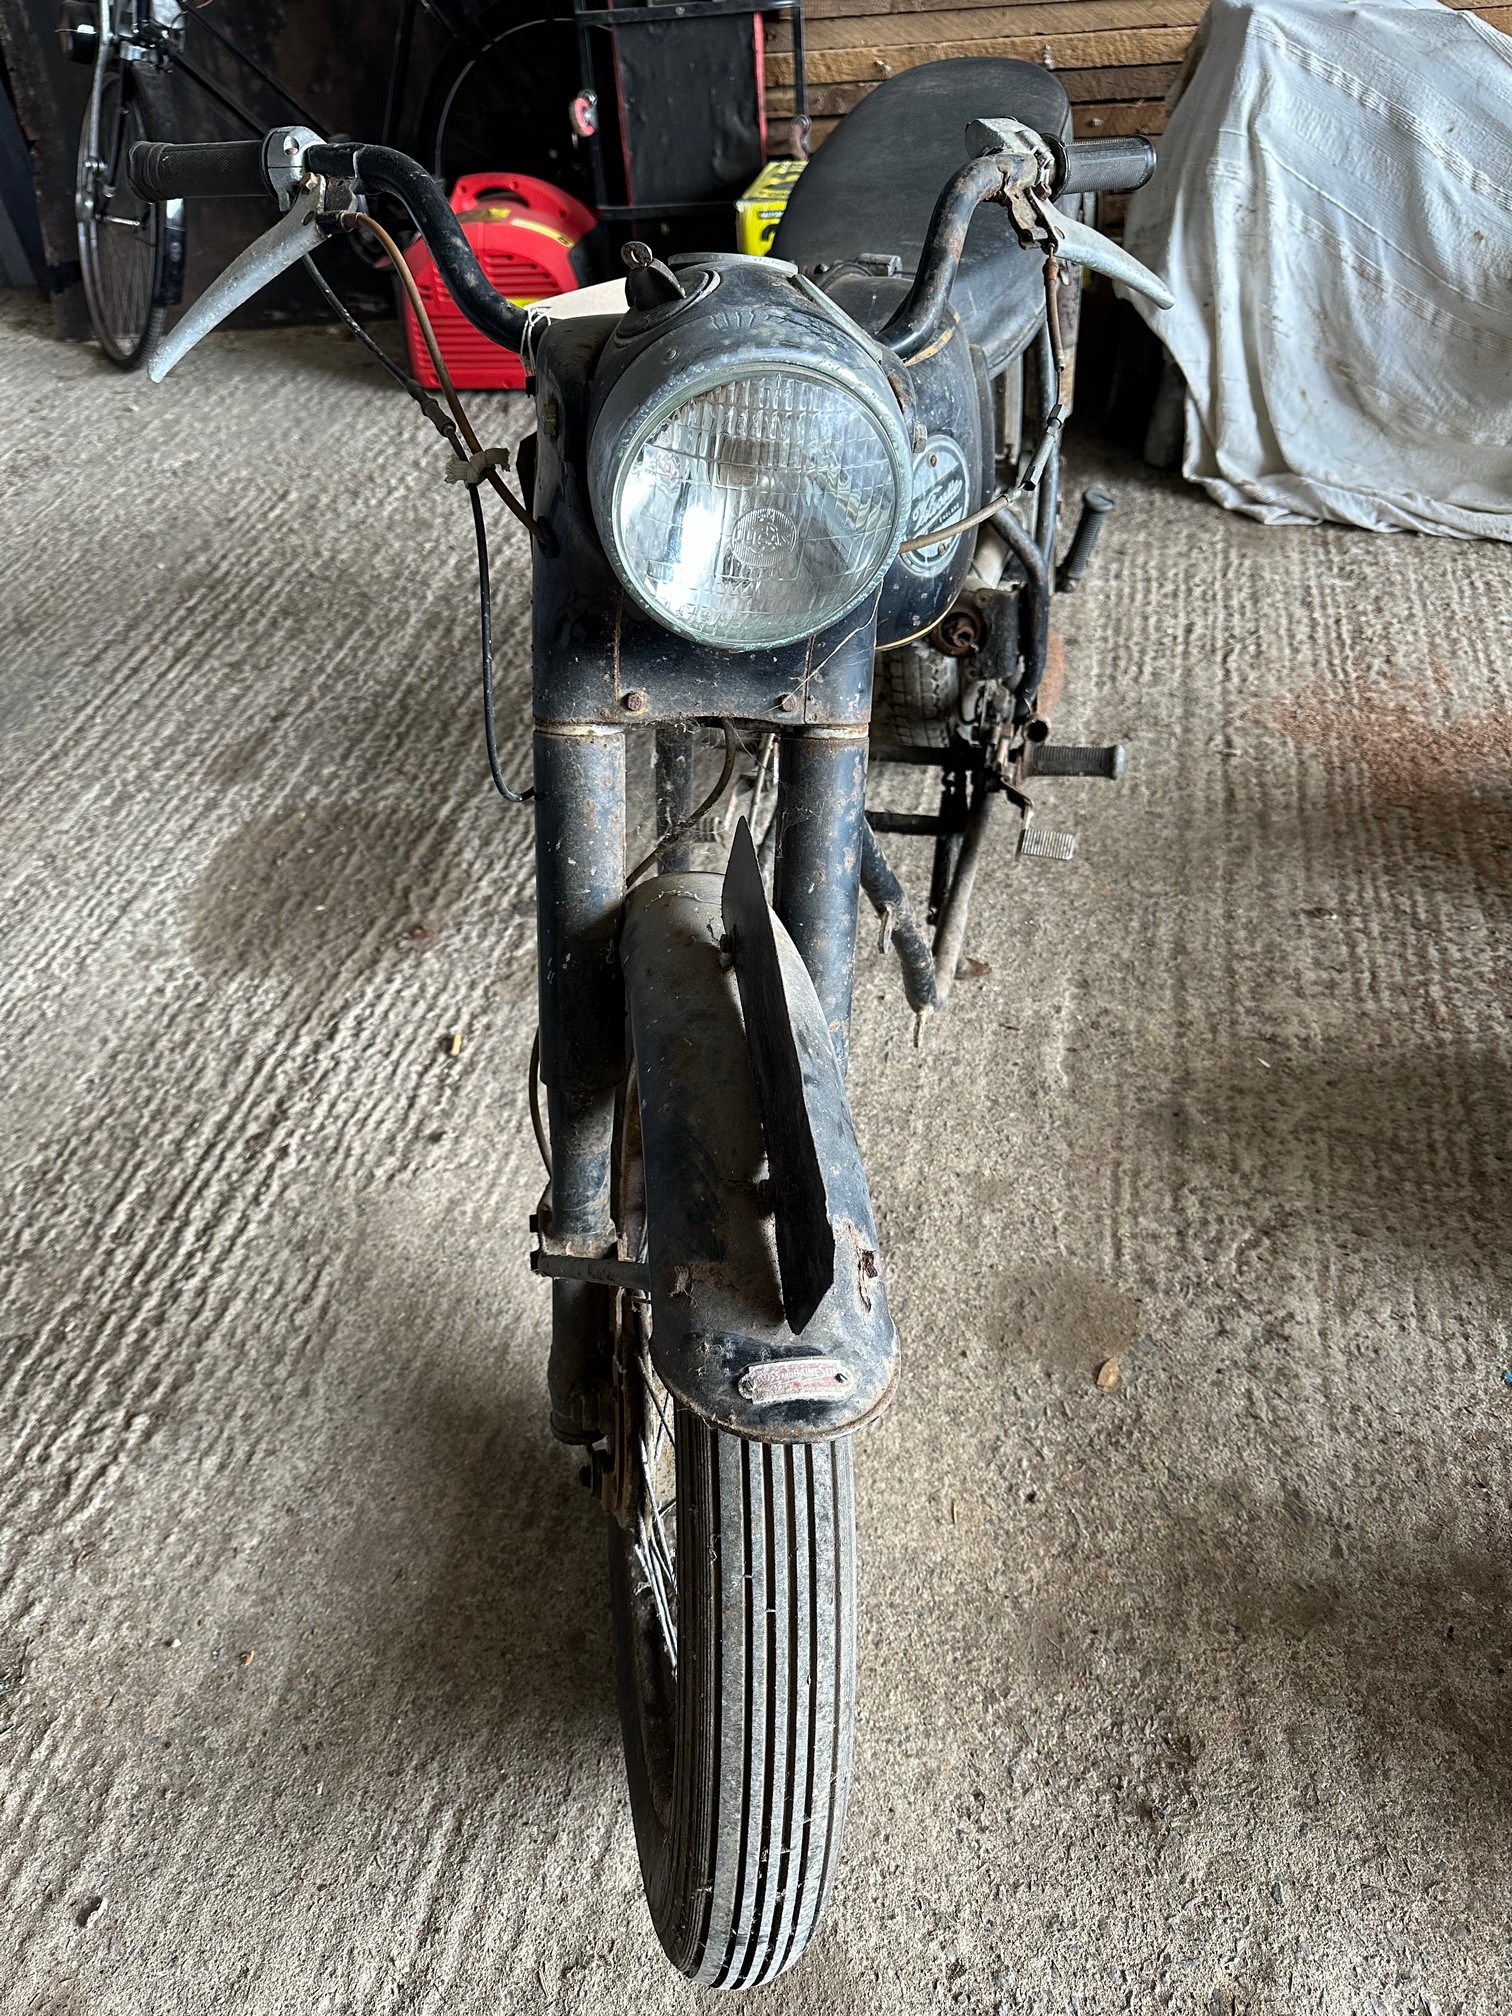 1960 VELOCETTE VALIANT 192cc PROJECT - Image 3 of 9